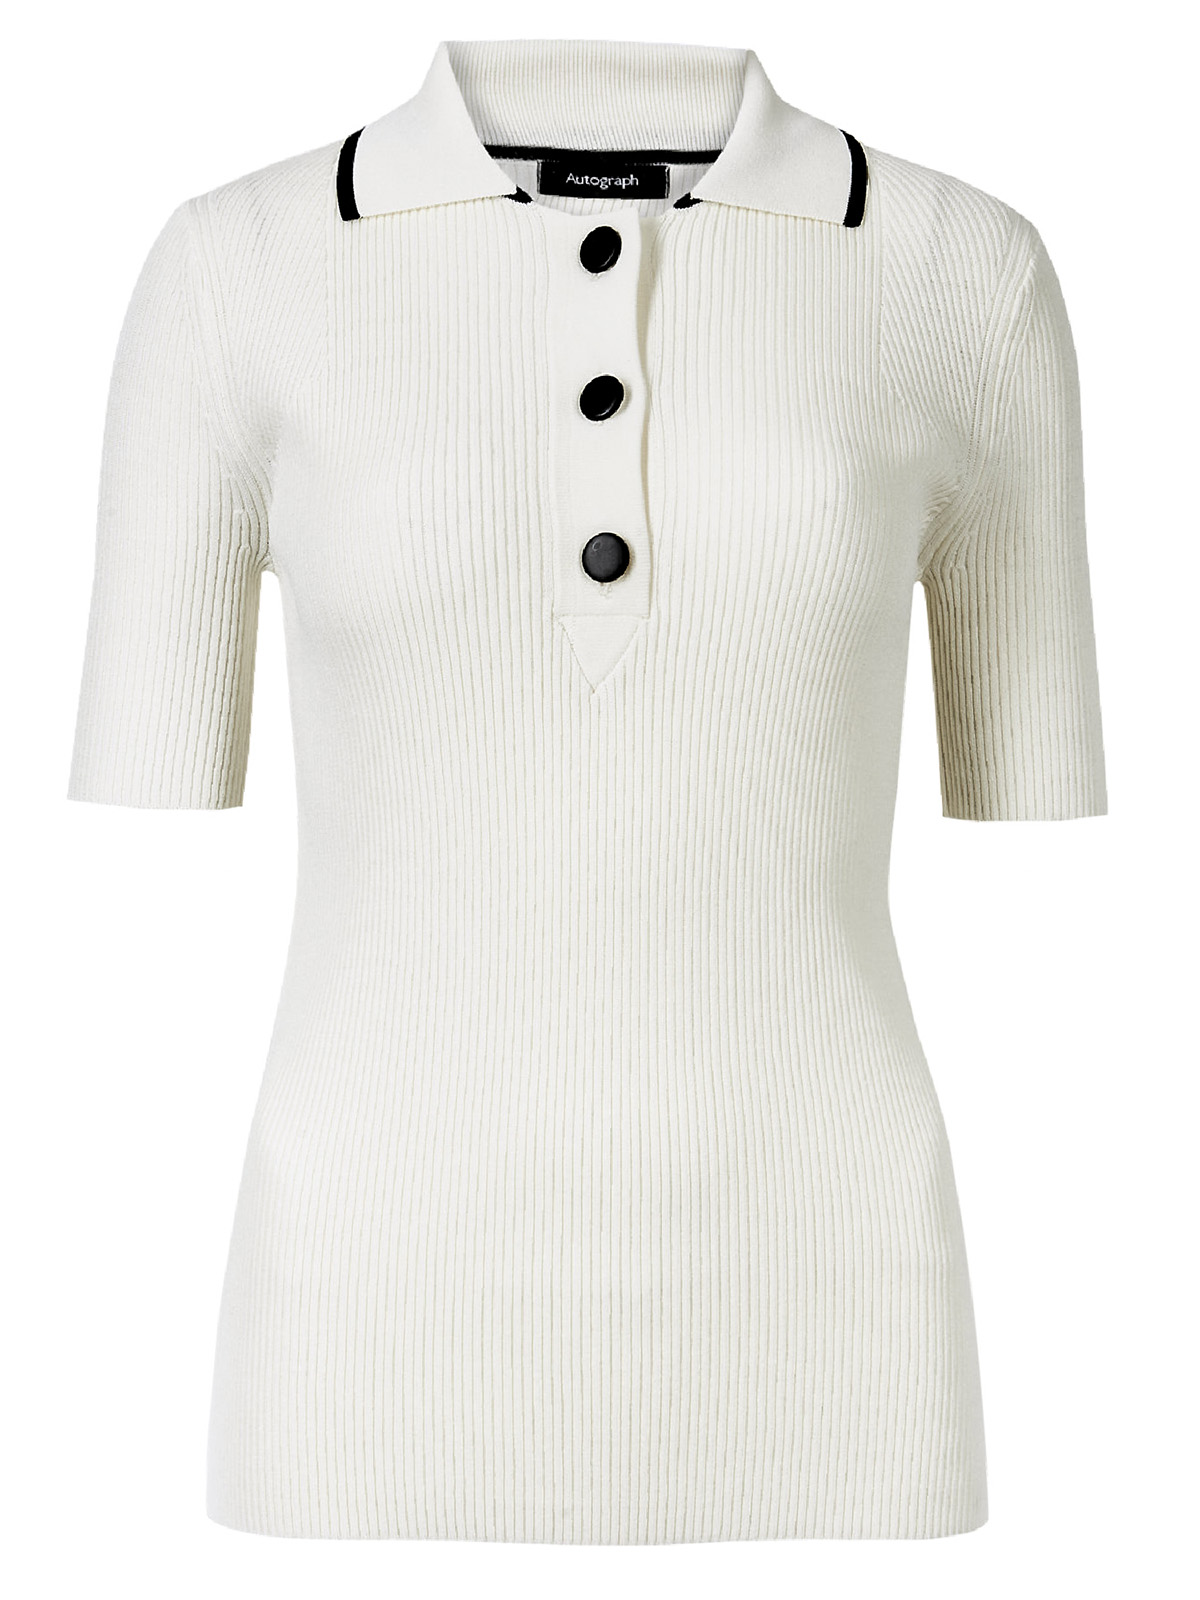 Marks and Spencer - - M&5 4UTOGRAPH CREAM Textured Collared Neck Short ...